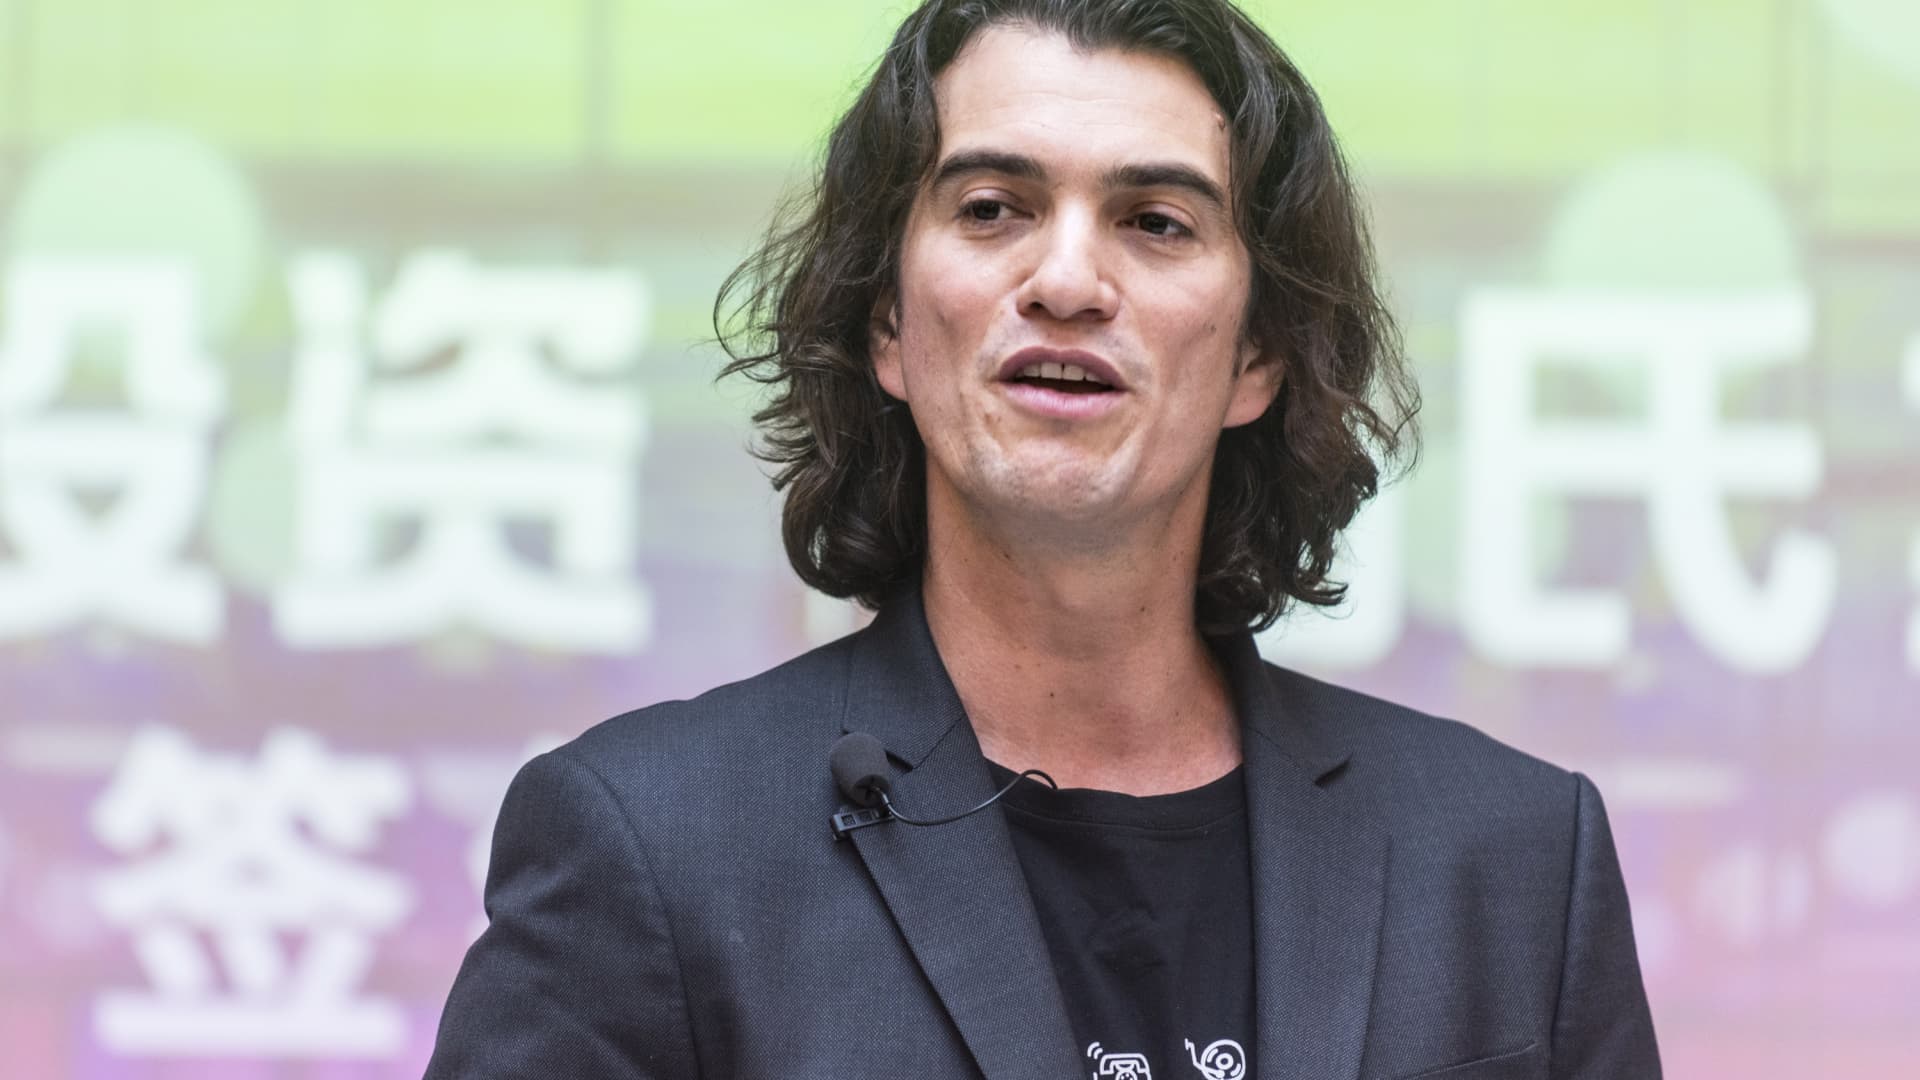 Adam Neumann’s bid to acquire back WeWork faces uphill battle owing to funding troubles